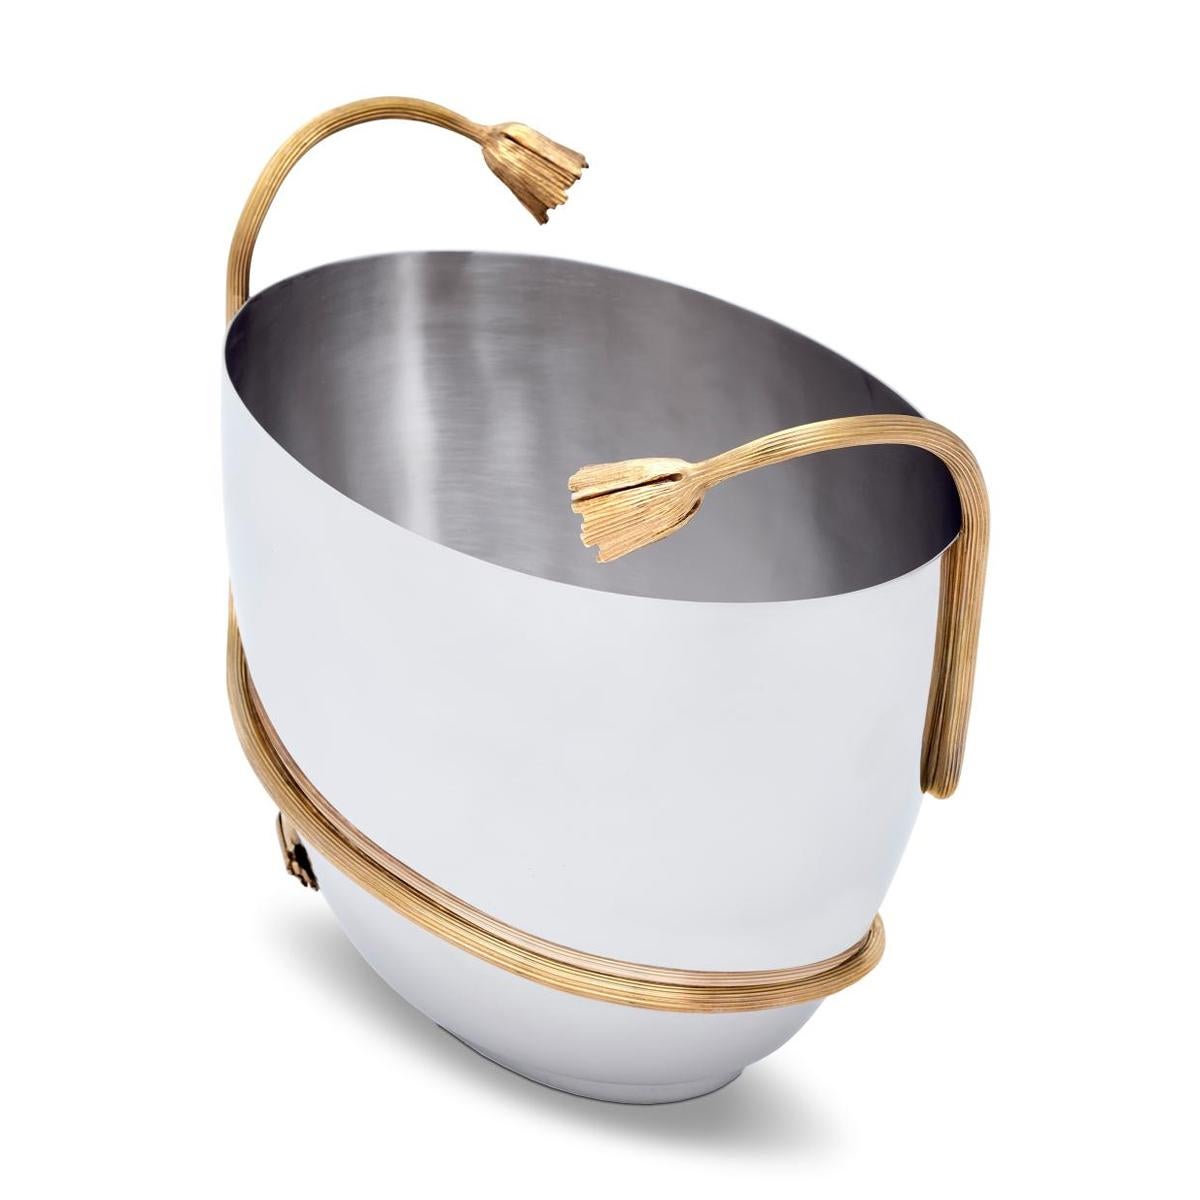 Champagne cooler gold stalk in polished
stainless steel with 24-karat gold plated stalk.
Delivered in a luxury gift box.